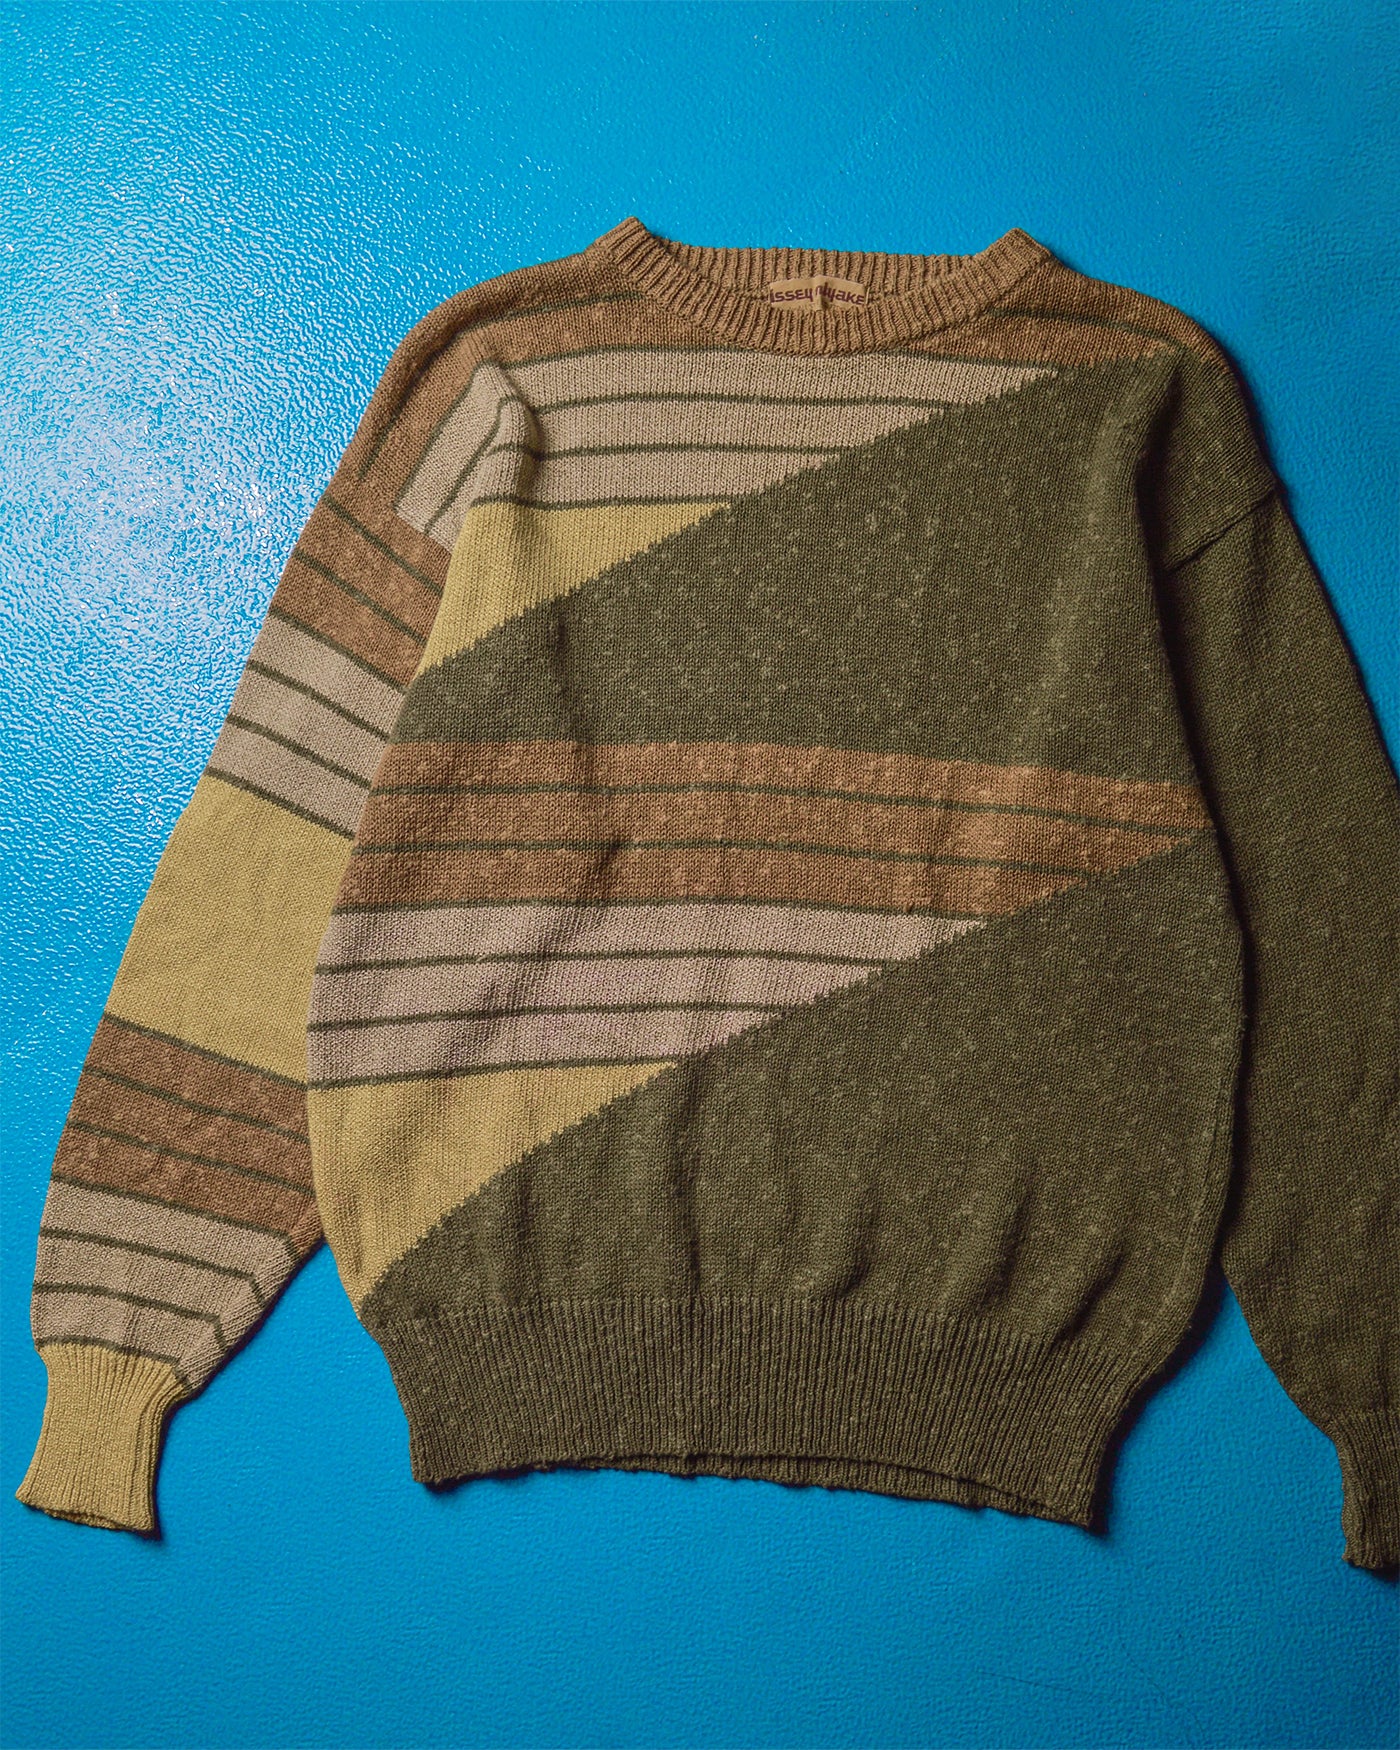 70s/ Early 80s Asymmetrical Brown Yellow Sleeve Pattern Knit Jumper (S~M)